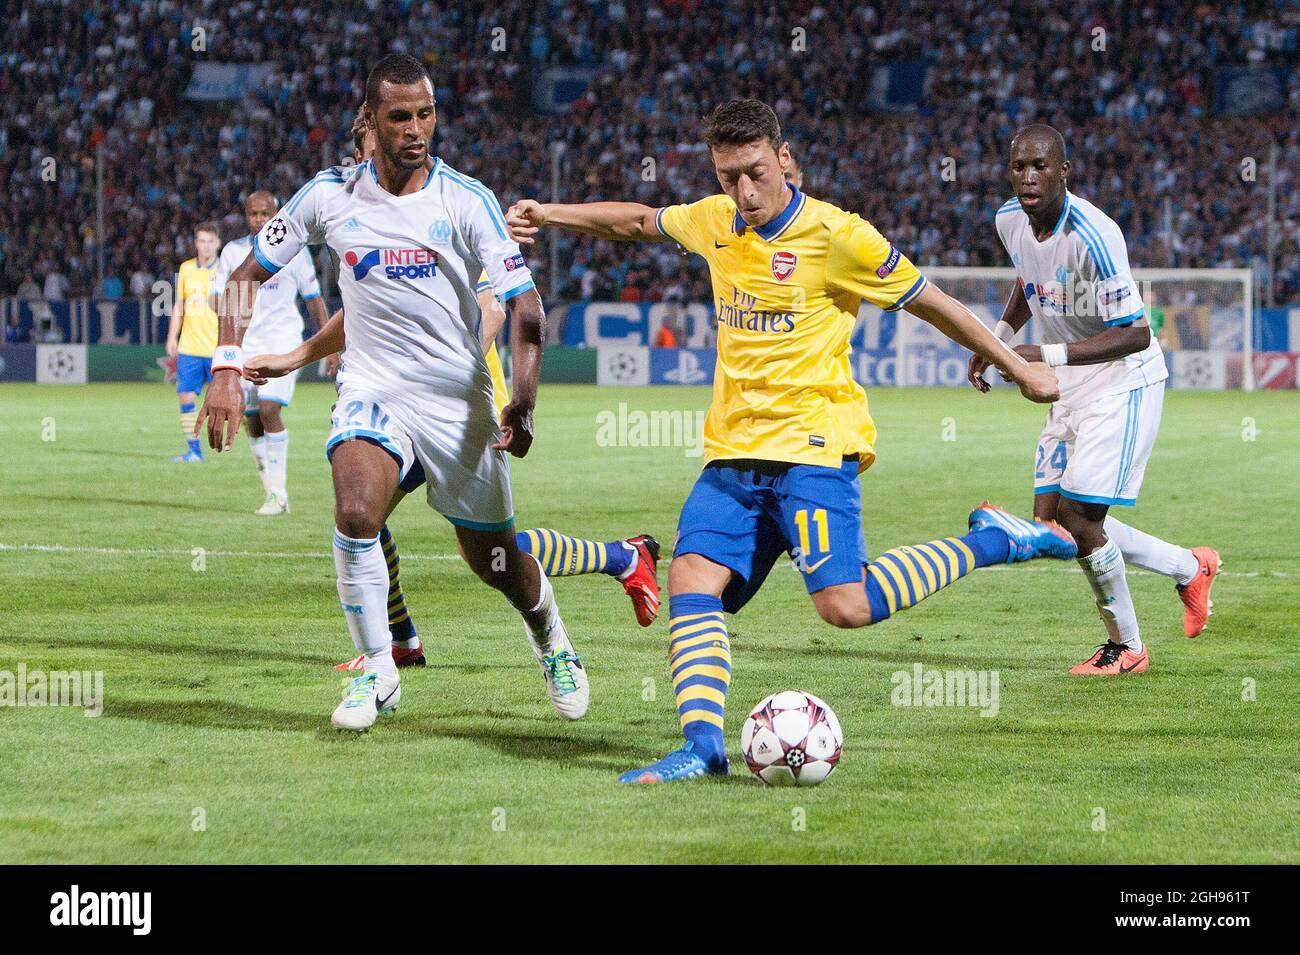 Arsenal's Mesut Ozil strikes at goal during the UEFA Champions&#8217; League Group F match between Olympique de Marseille and Arsenal FC at Stade Velodrome Stadium in Marseille, France, on Sept. 18, 2013. Stock Photo